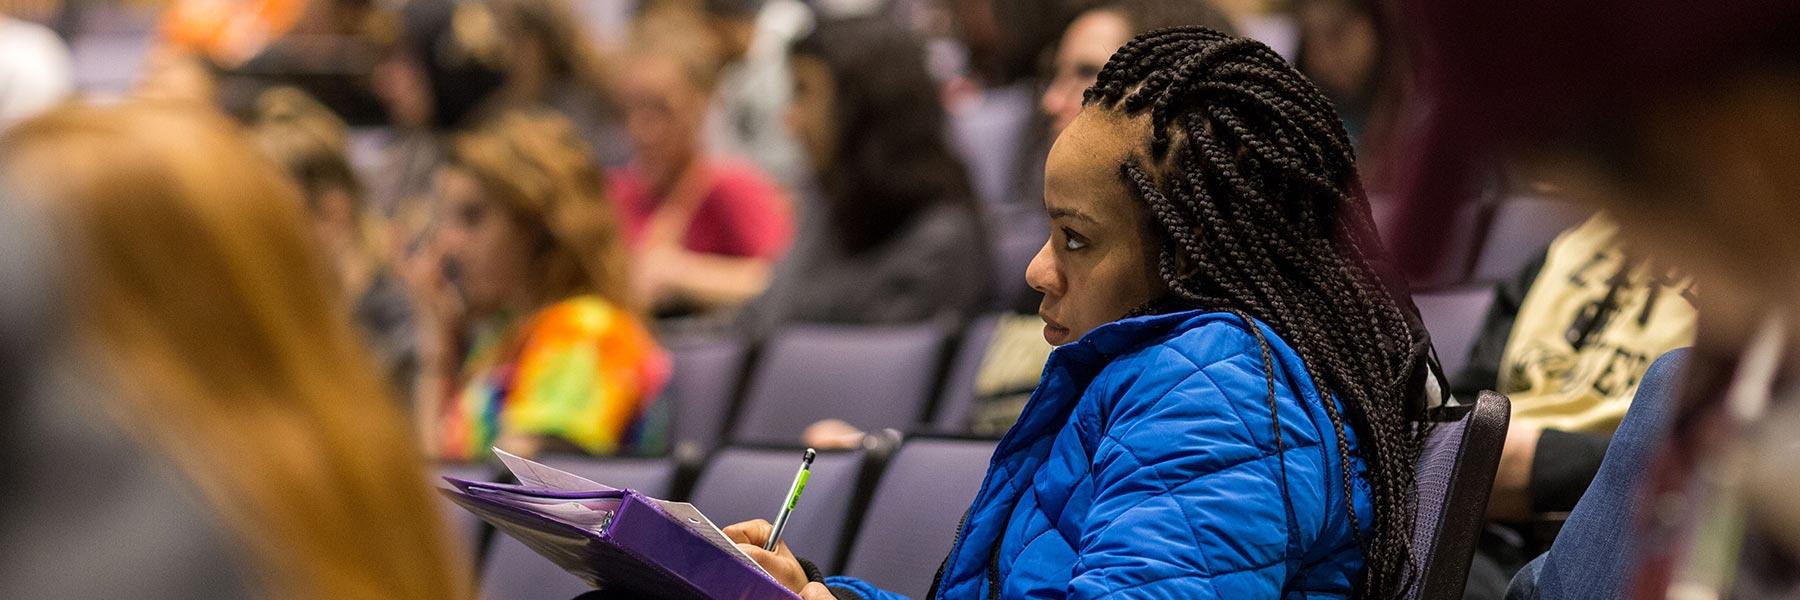 A student takes notes while listening to a lecture.